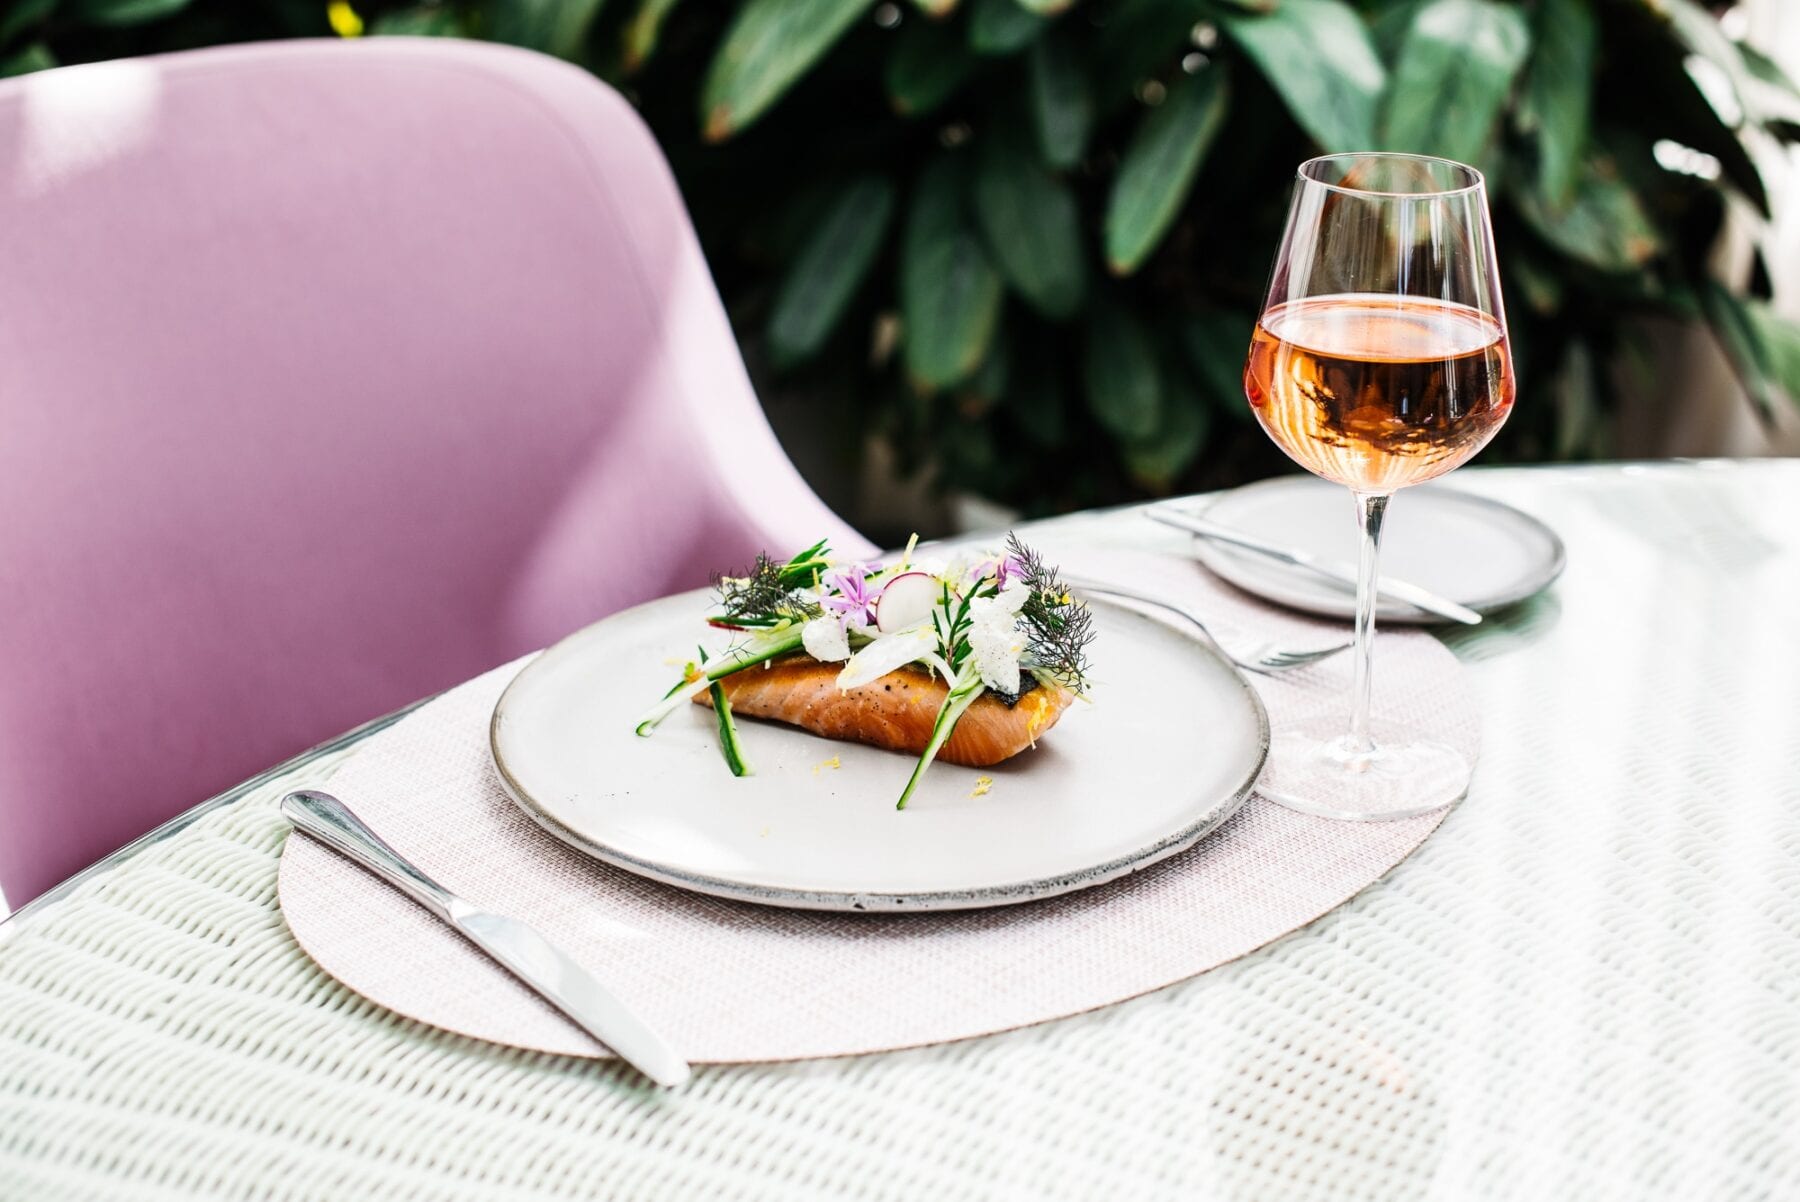 The Botanica Vaucluse: Farm-to-fork food in a gorgeous greenhouse setting